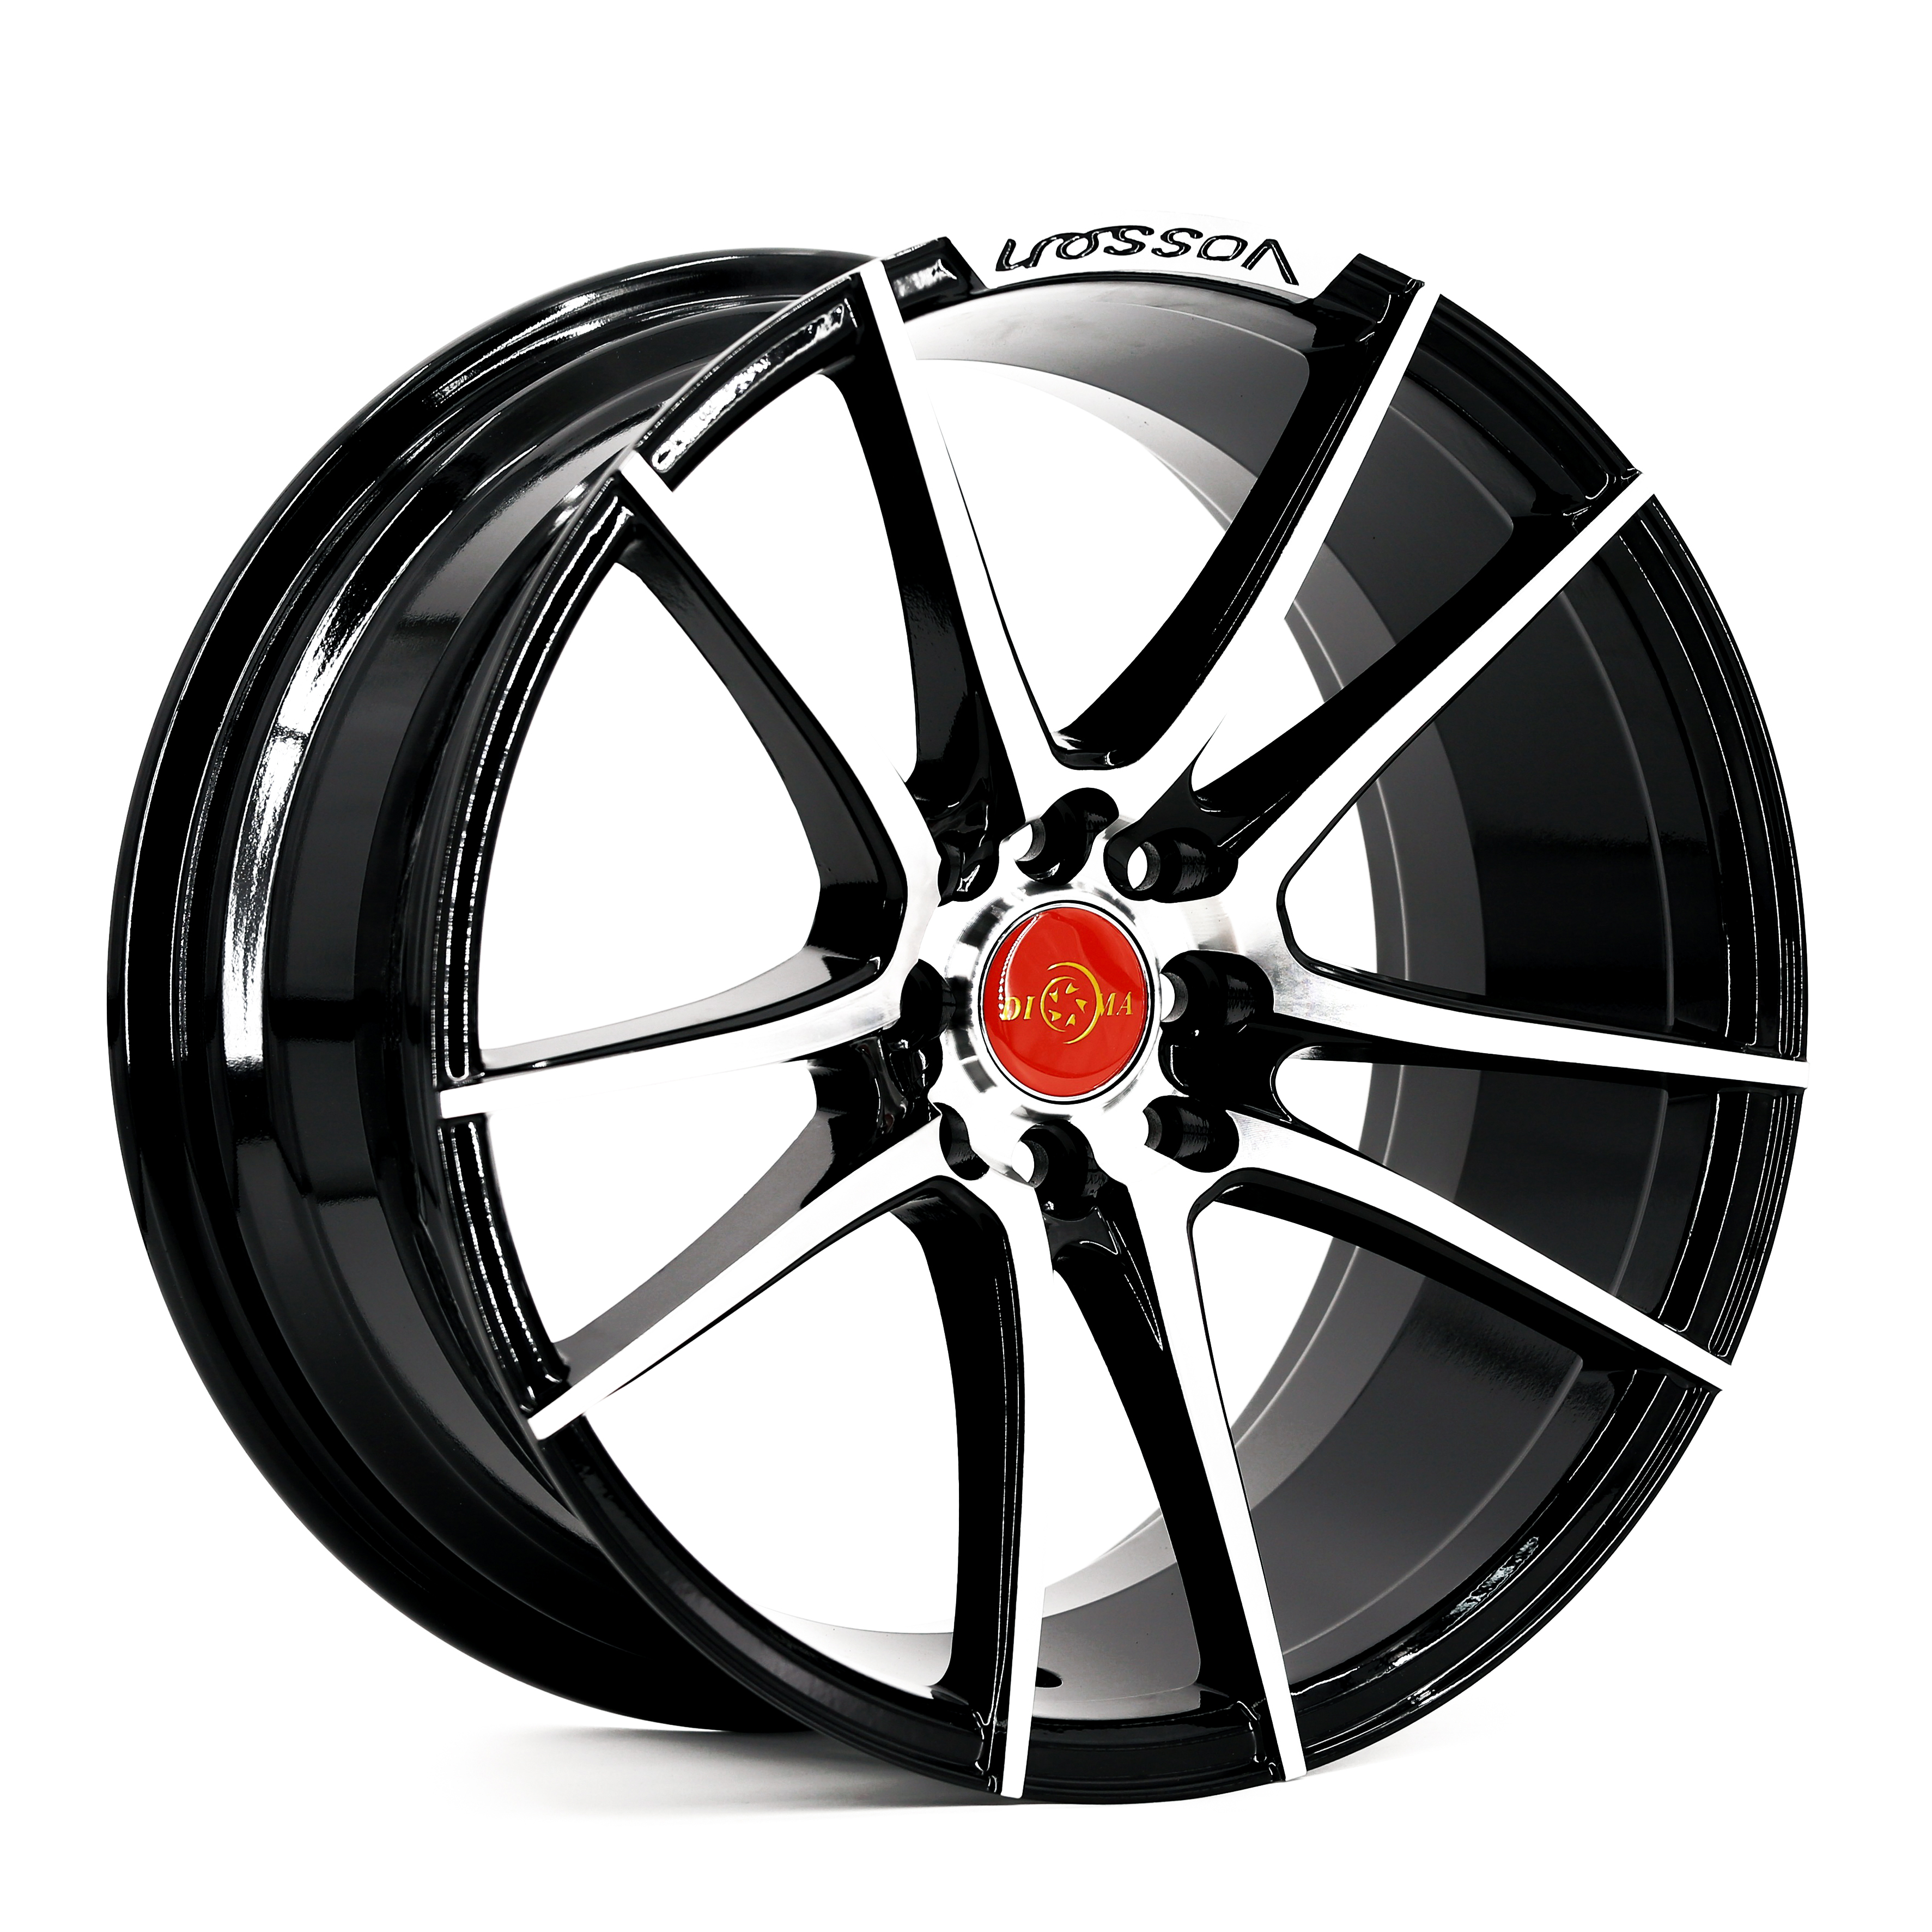 Super Purchasing for Deep Dish Alloy Wheels - High Speed 15/17inch Casting Alloy Wheel Wholesale – Rayone